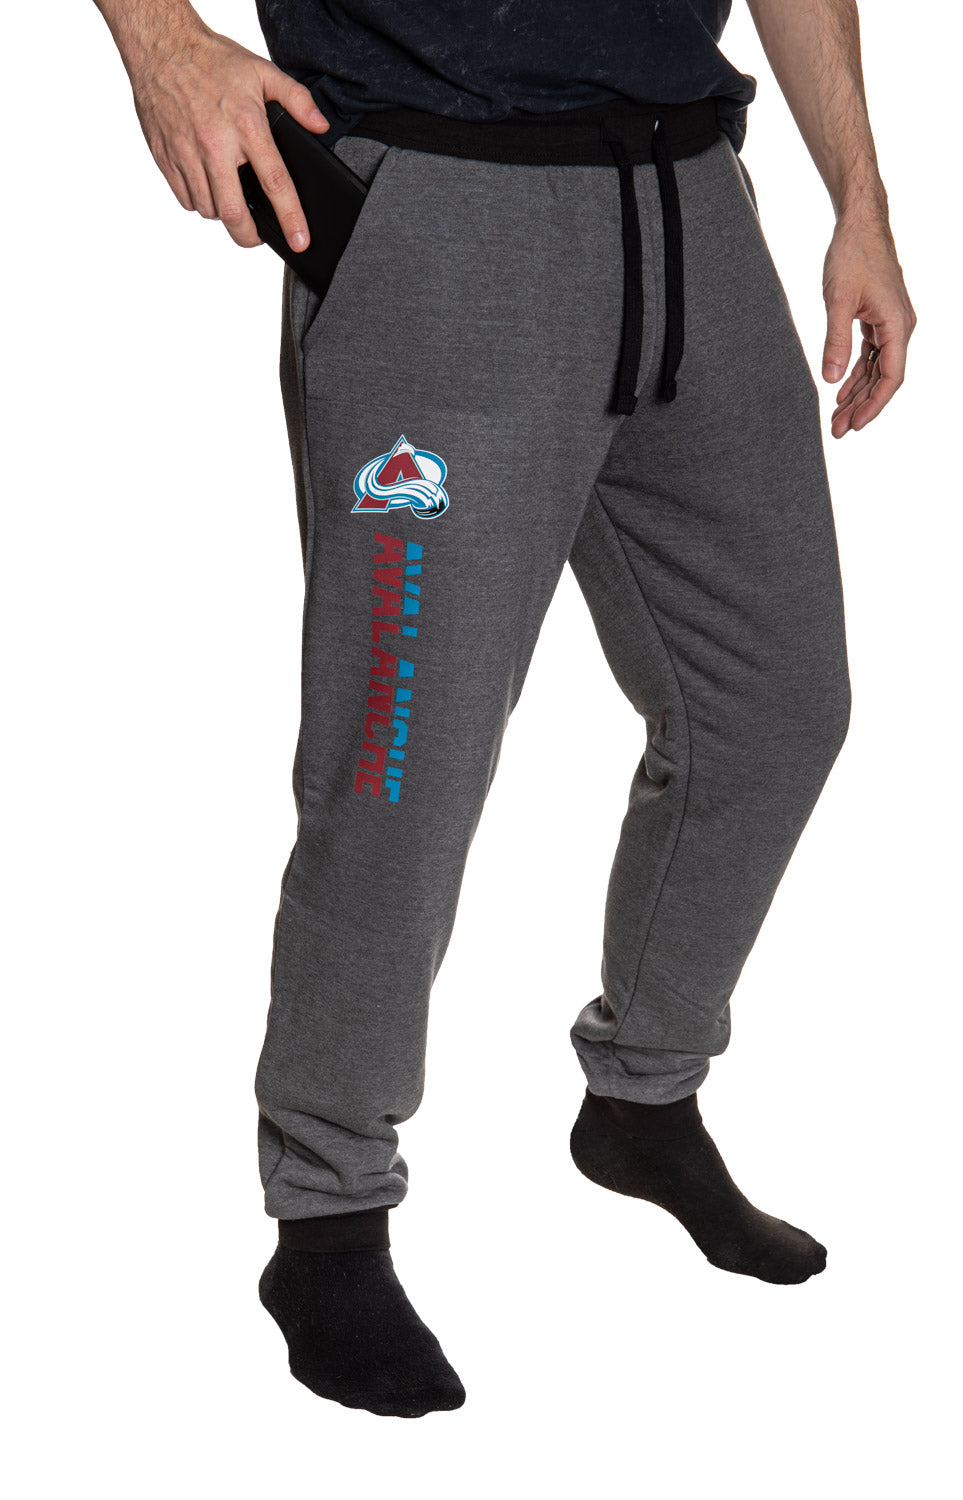 Colorado Avalanche NHL Unisex Sherpa Lined Warm Sweatpants with Pockets